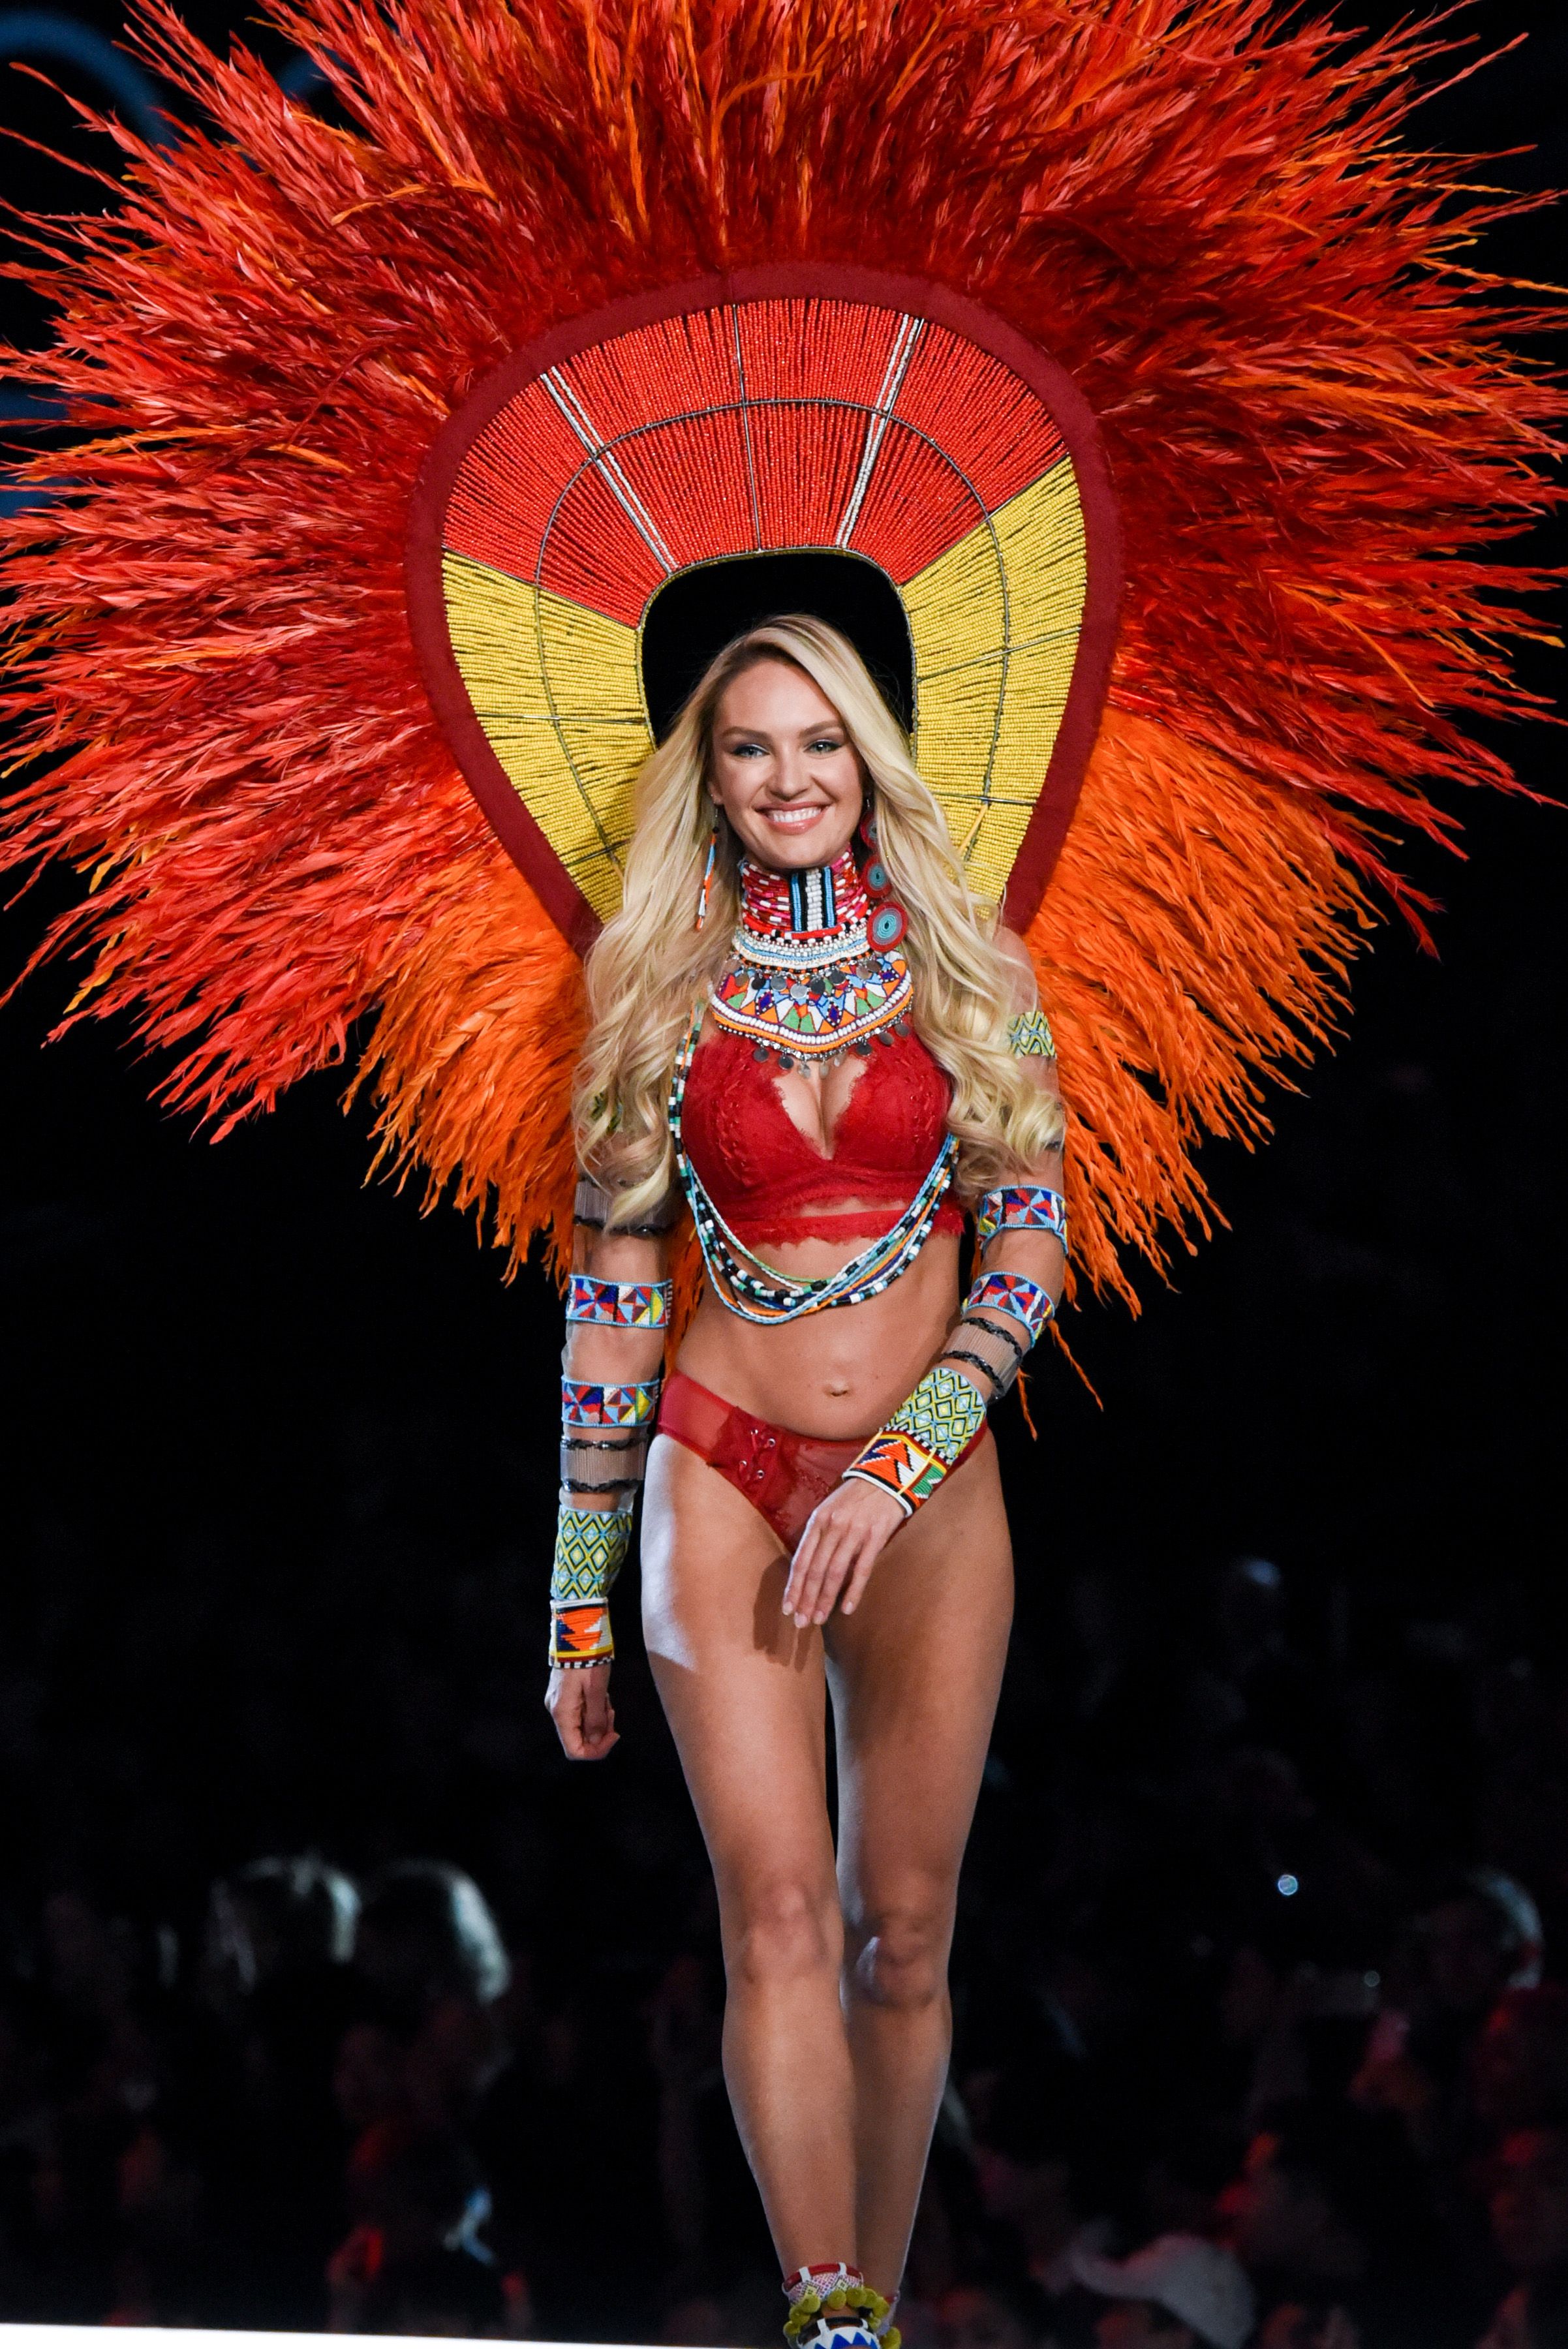 How to work out like a Victoria's Secret Angel